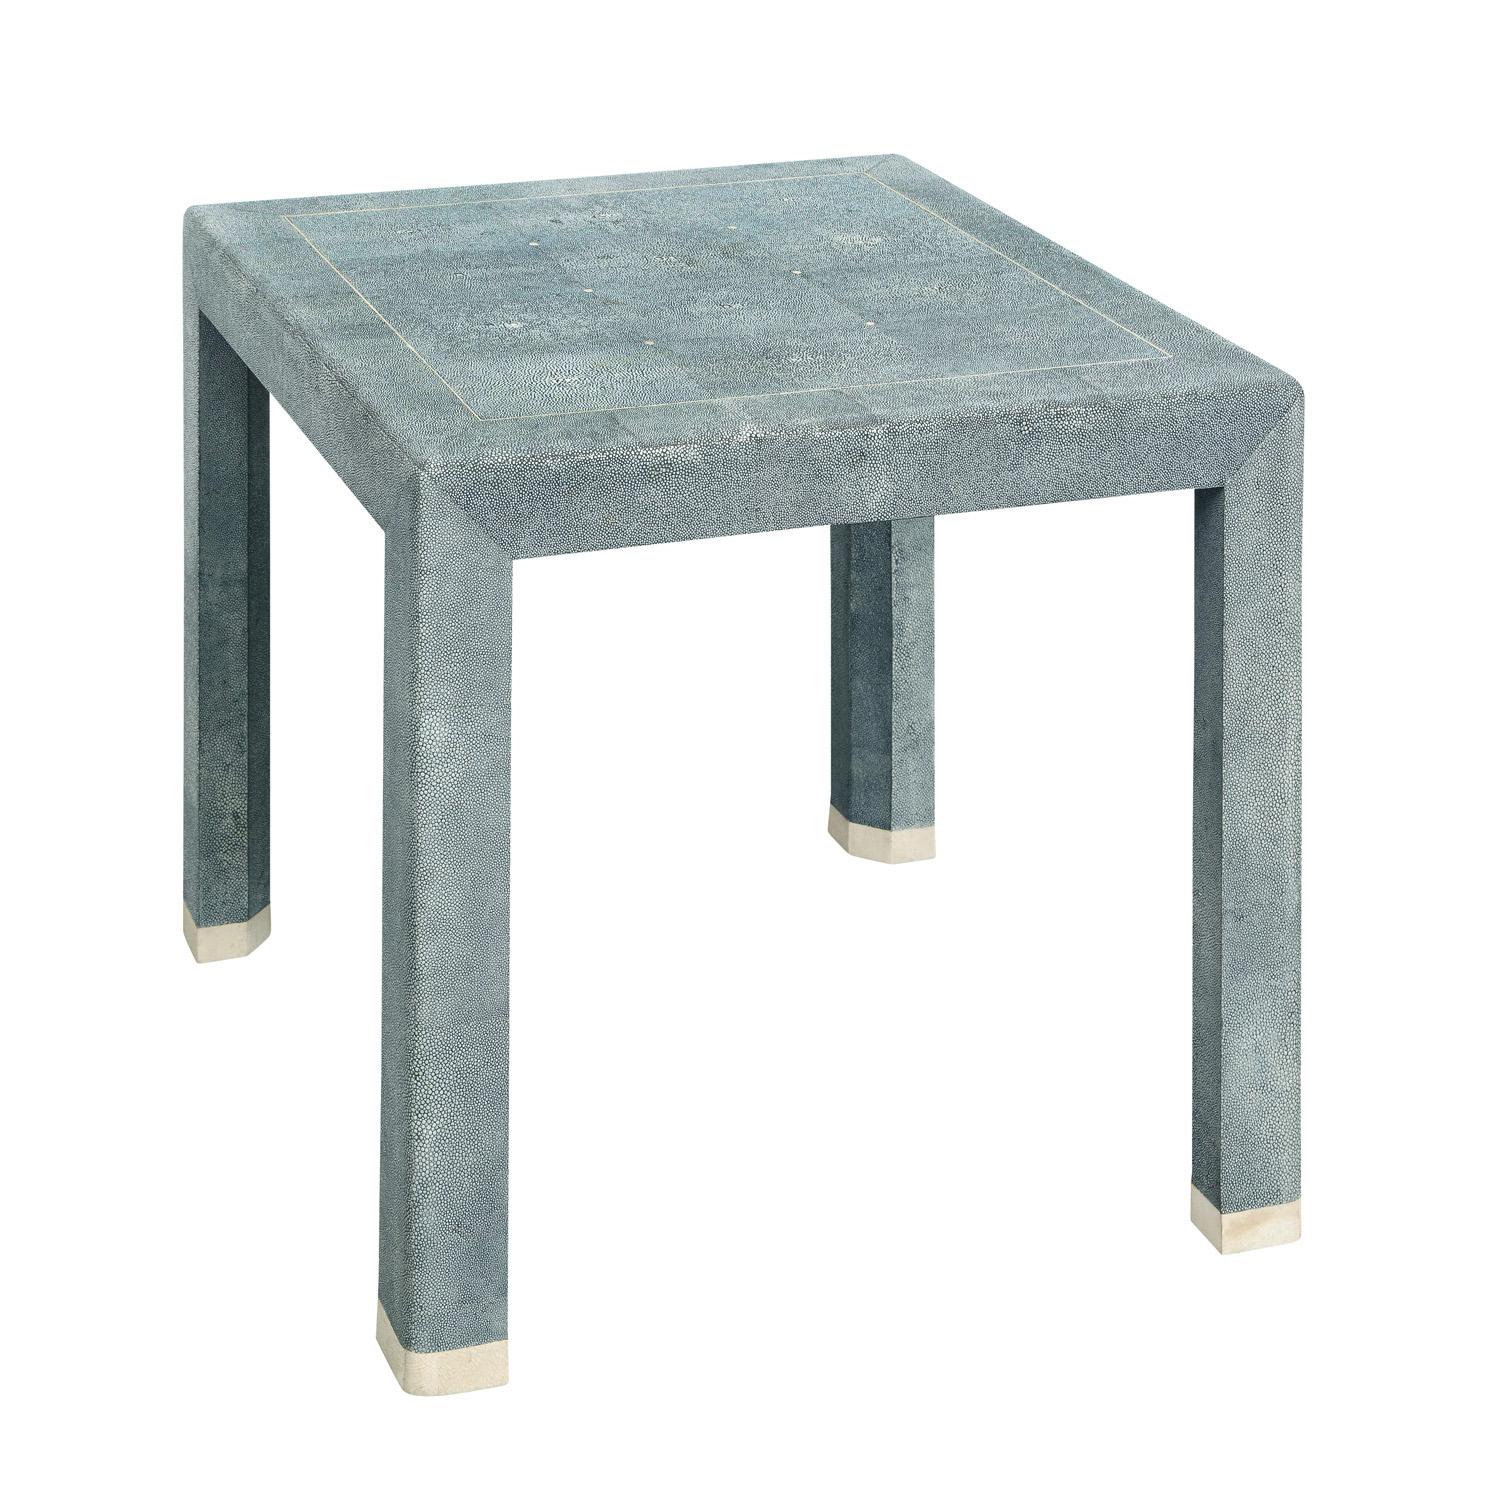 Modern Karl Springer End Tables in Shagreen with Bone Inlays 1980s 'Signed'